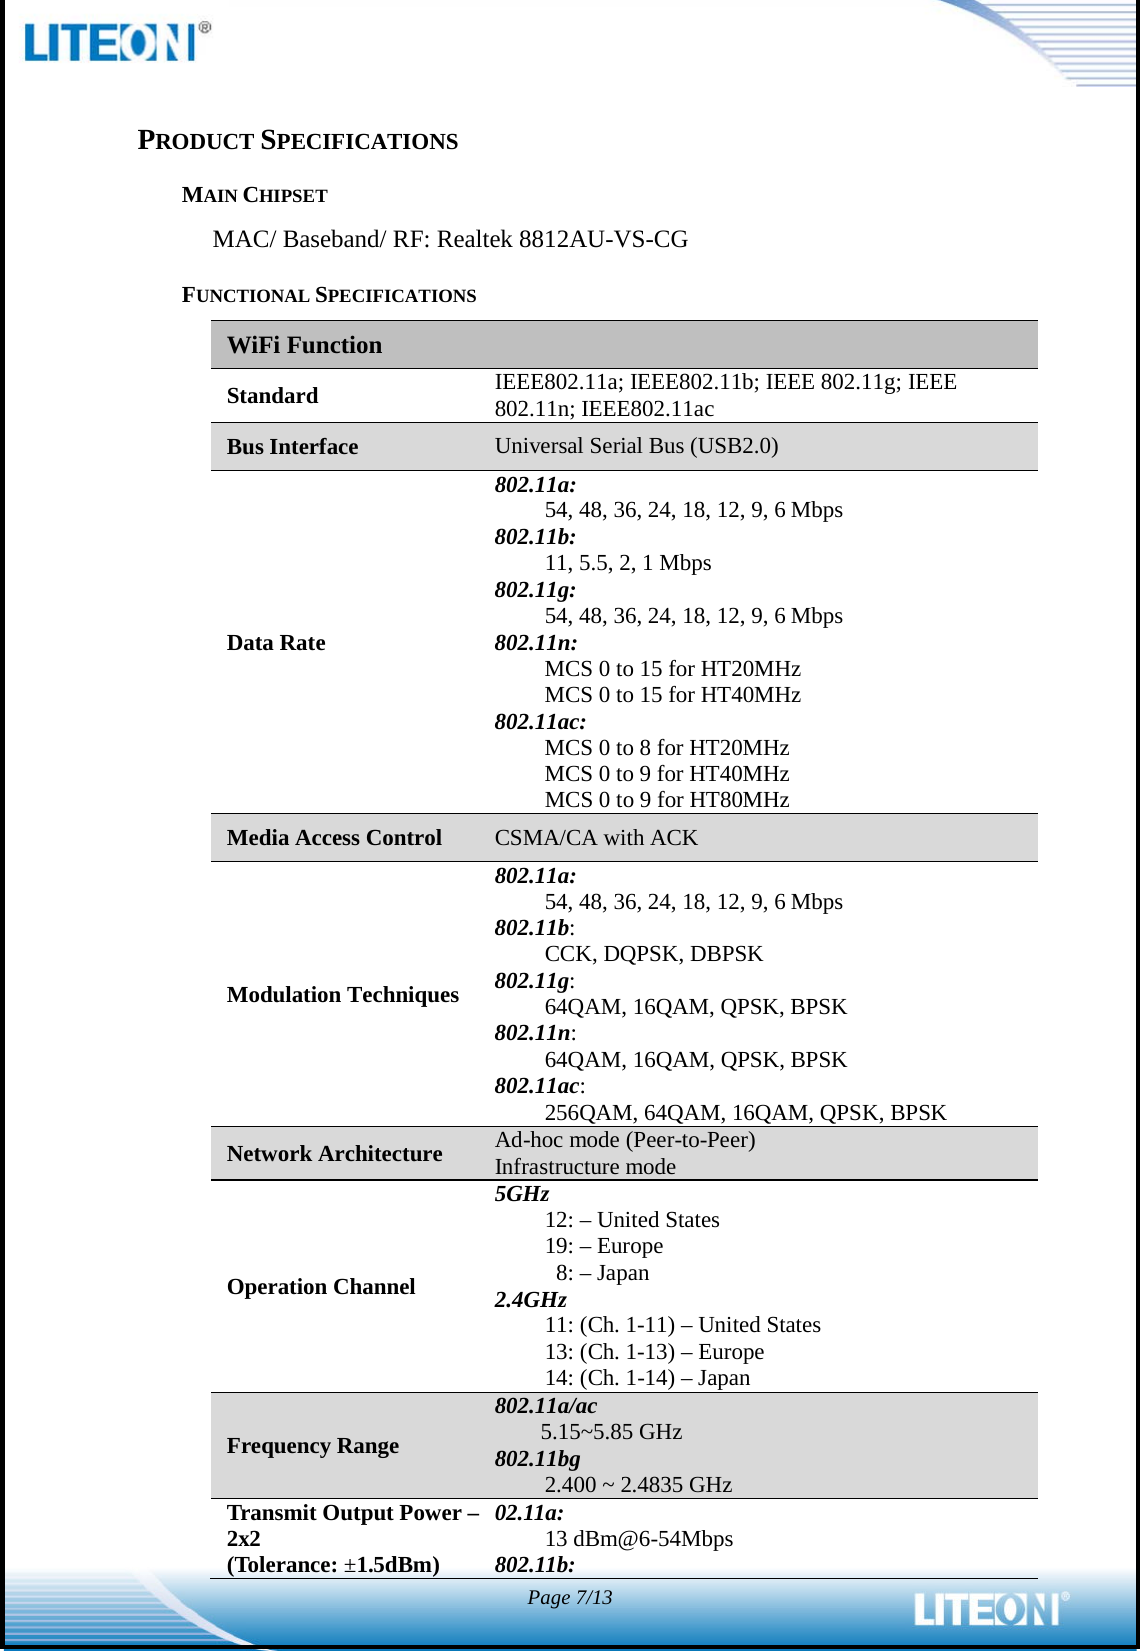  Page 7/13   PRODUCT SPECIFICATIONS MAIN CHIPSET MAC/ Baseband/ RF: Realtek 8812AU-VS-CG FUNCTIONAL SPECIFICATIONS WiFi Function Standard IEEE802.11a; IEEE802.11b; IEEE 802.11g; IEEE 802.11n; IEEE802.11ac Bus Interface Universal Serial Bus (USB2.0) Data Rate 802.11a: 54, 48, 36, 24, 18, 12, 9, 6 Mbps 802.11b: 11, 5.5, 2, 1 Mbps 802.11g: 54, 48, 36, 24, 18, 12, 9, 6 Mbps 802.11n: MCS 0 to 15 for HT20MHz MCS 0 to 15 for HT40MHz 802.11ac: MCS 0 to 8 for HT20MHz MCS 0 to 9 for HT40MHz MCS 0 to 9 for HT80MHz Media Access Control CSMA/CA with ACK Modulation Techniques 802.11a: 54, 48, 36, 24, 18, 12, 9, 6 Mbps 802.11b: CCK, DQPSK, DBPSK 802.11g: 64QAM, 16QAM, QPSK, BPSK 802.11n: 64QAM, 16QAM, QPSK, BPSK 802.11ac: 256QAM, 64QAM, 16QAM, QPSK, BPSK Network Architecture Ad-hoc mode (Peer-to-Peer) Infrastructure mode Operation Channel 5GHz 12: – United States 19: – Europe 8: – Japan 2.4GHz 11: (Ch. 1-11) – United States 13: (Ch. 1-13) – Europe 14: (Ch. 1-14) – Japan Frequency Range 802.11a/ac     5.15~5.85 GHz 802.11bg 2.400 ~ 2.4835 GHz Transmit Output Power – 2x2 (Tolerance: ±1.5dBm) 02.11a: 13 dBm@6-54Mbps 802.11b: 